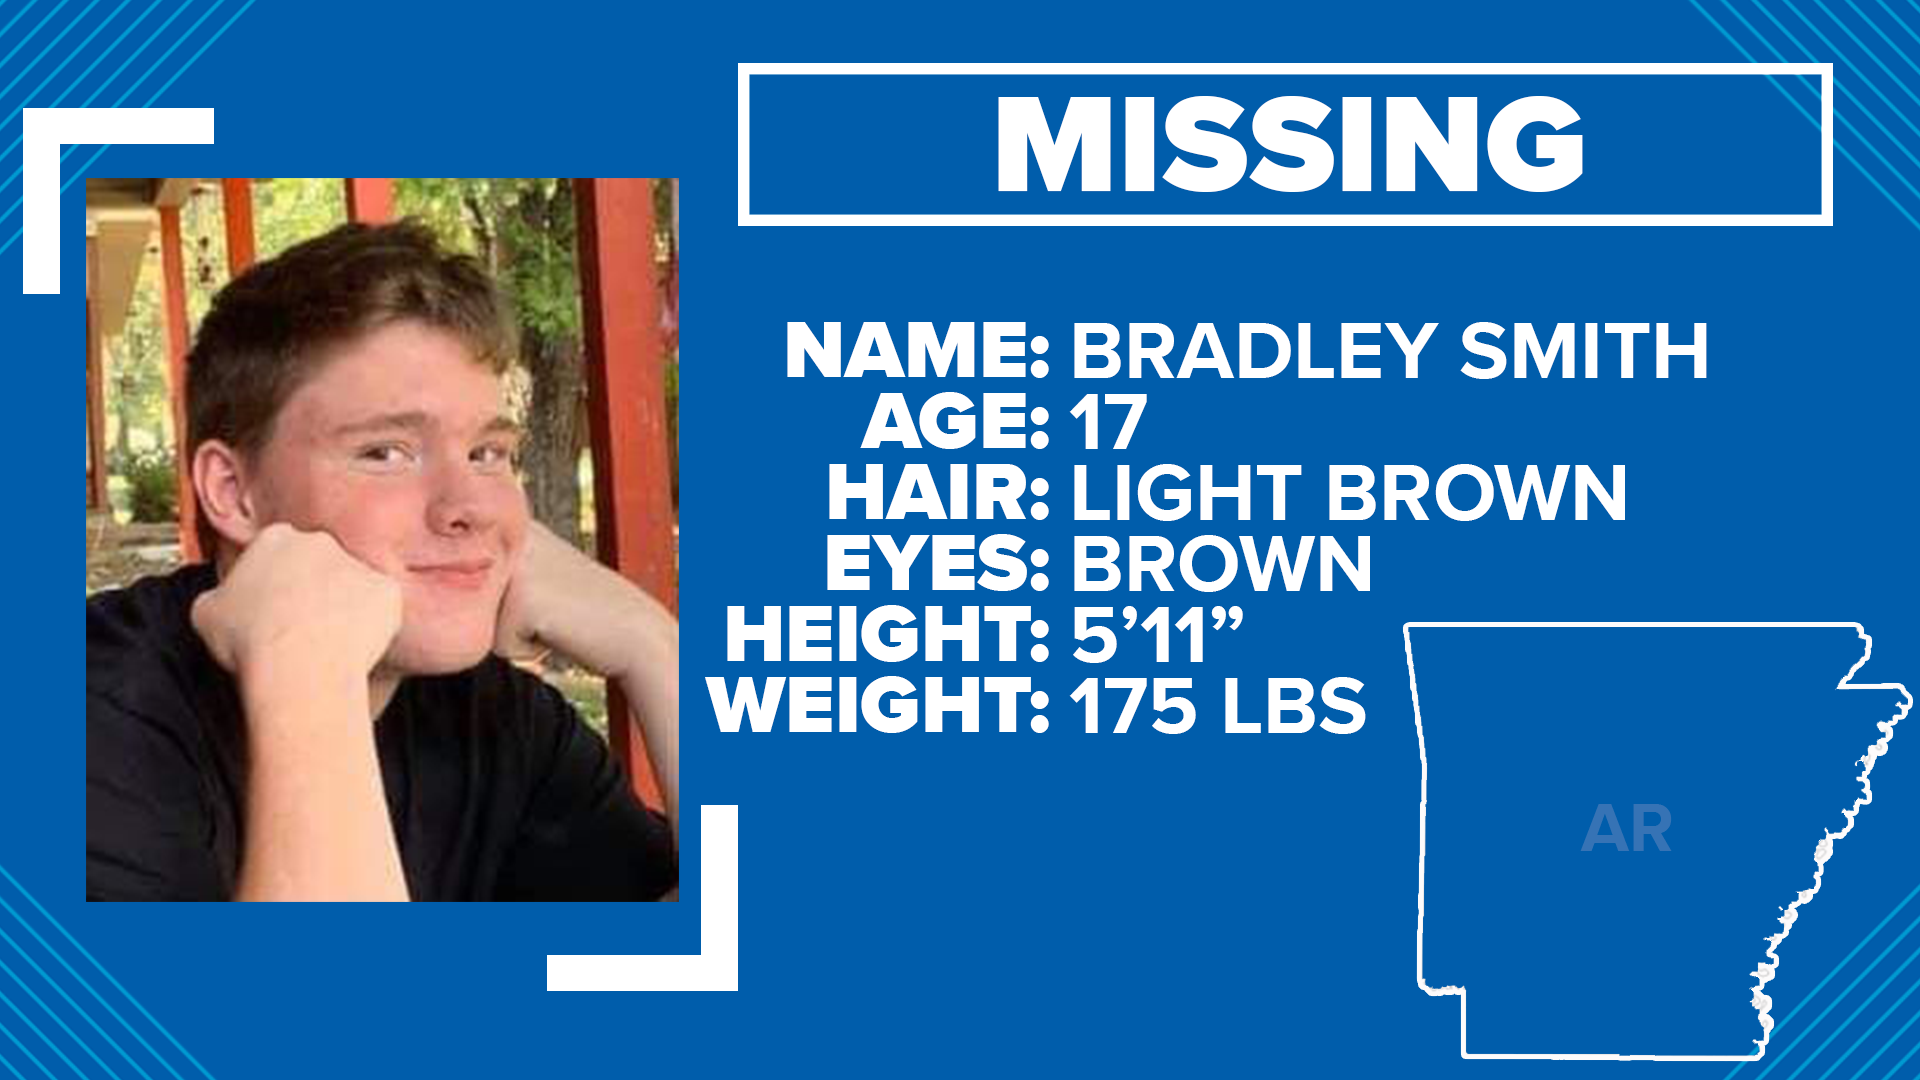 The Independence County Sheriff's Department is asking for the public's help in searching for missing 17-year-old Bradley Smith.